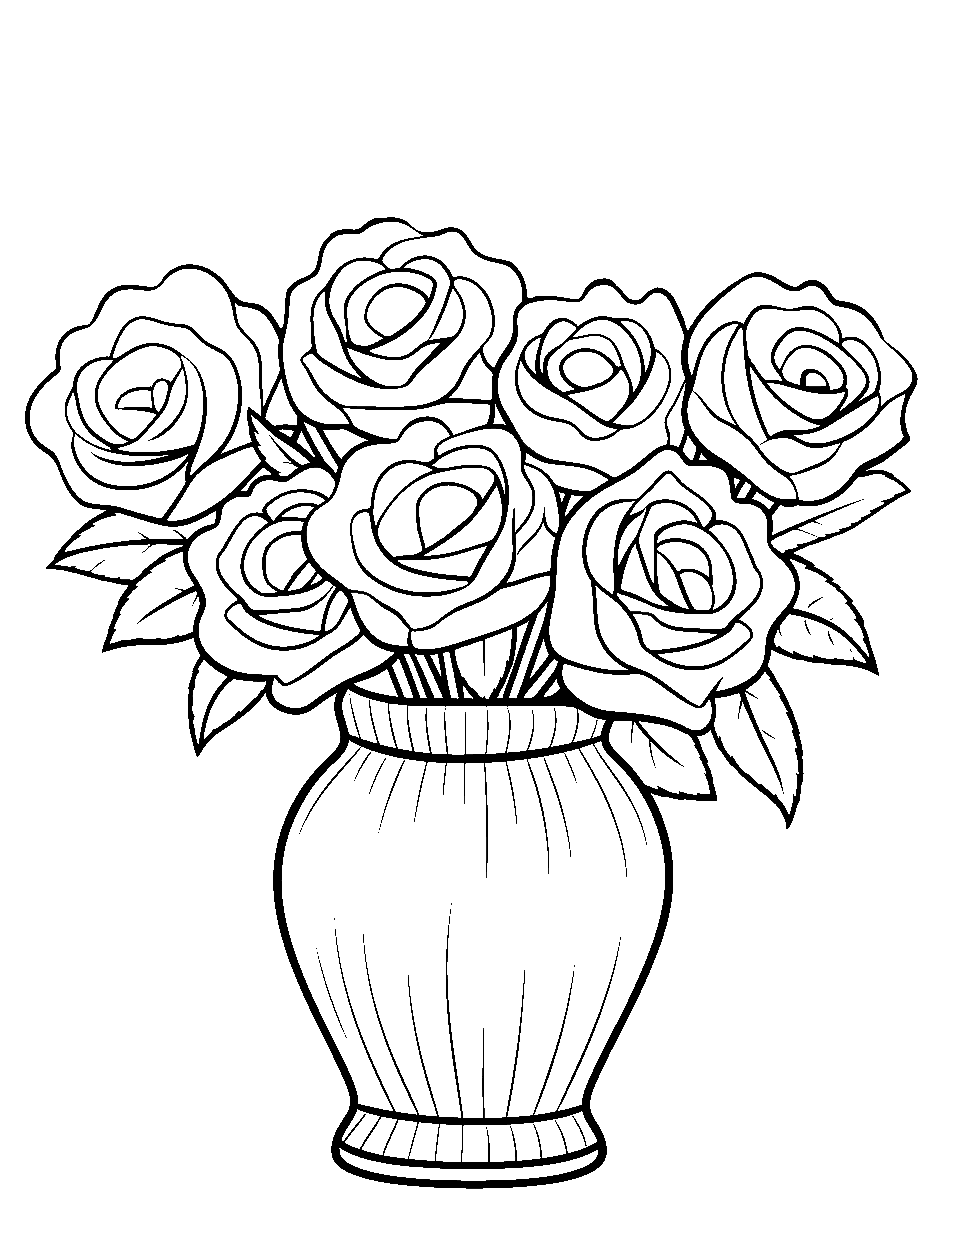 Roses in a Vase Coloring Page - A vase filled with roses for a special someone.